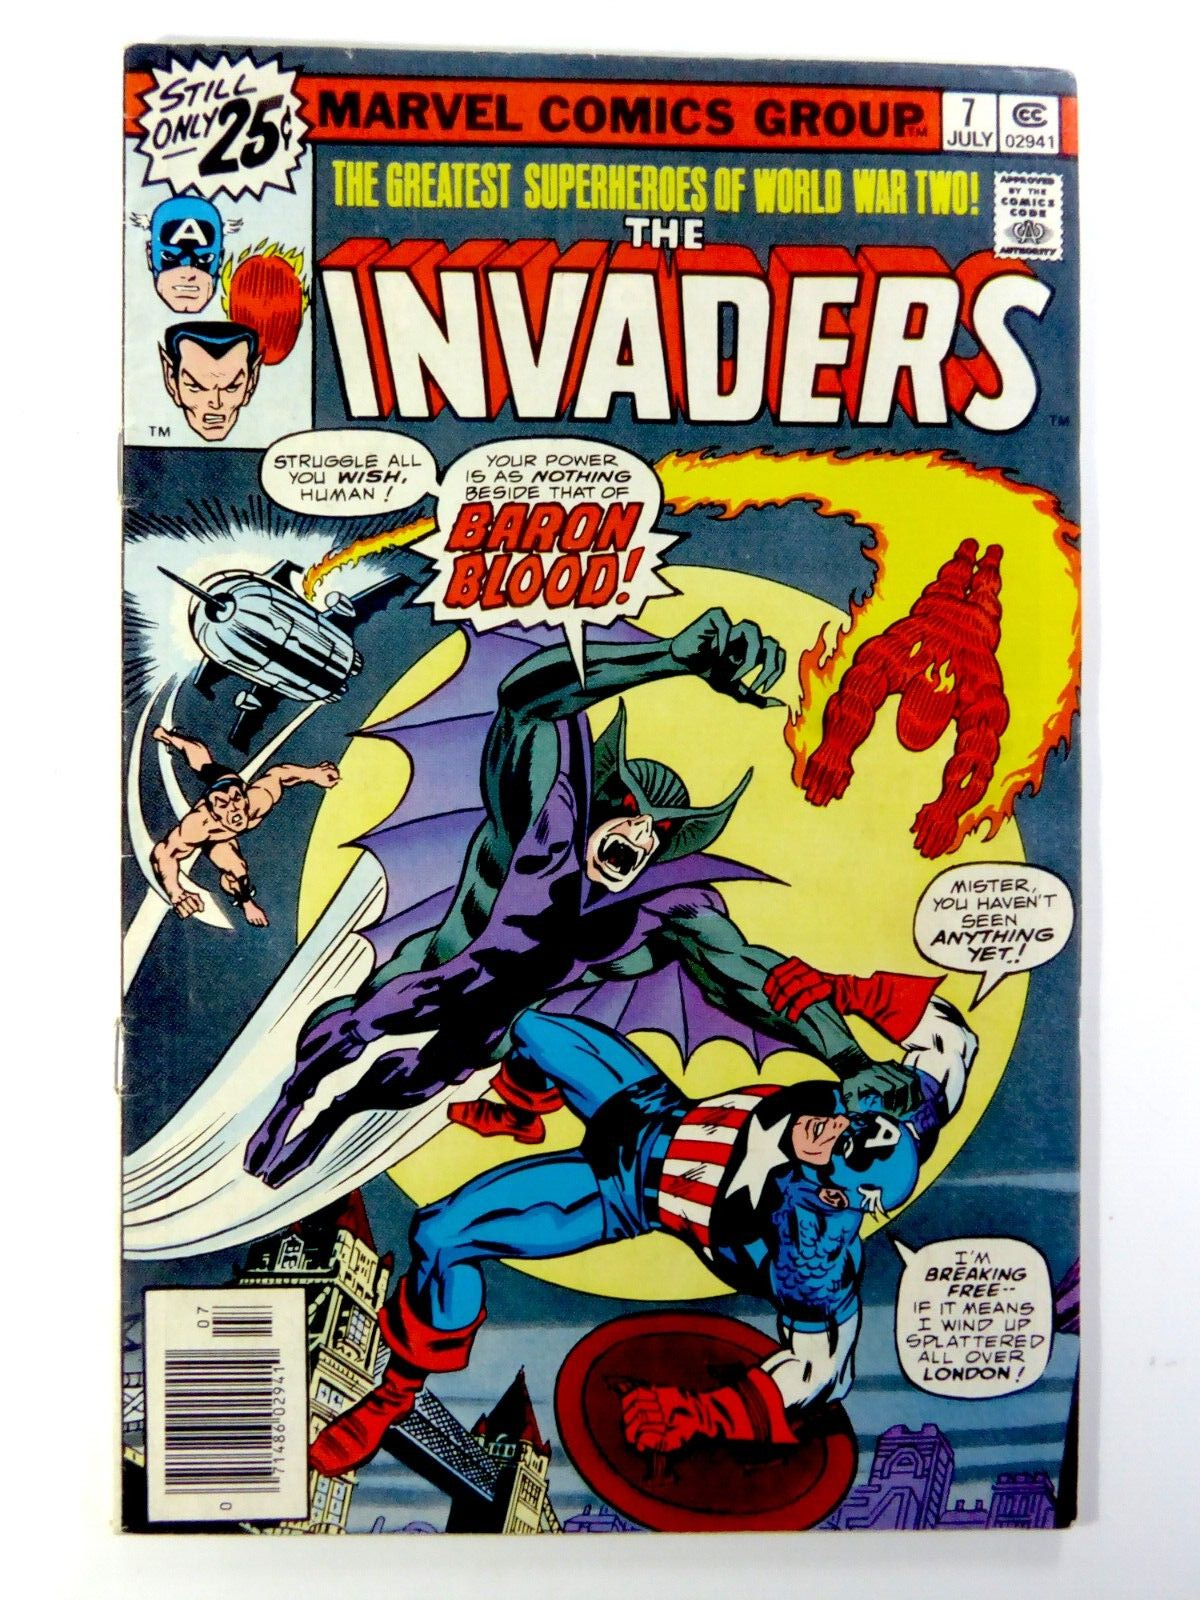 Marvel INVADERS (1976) #7 KEY NEW UNION+BARON BLOOD VG/FN (5.0) Ships FREE